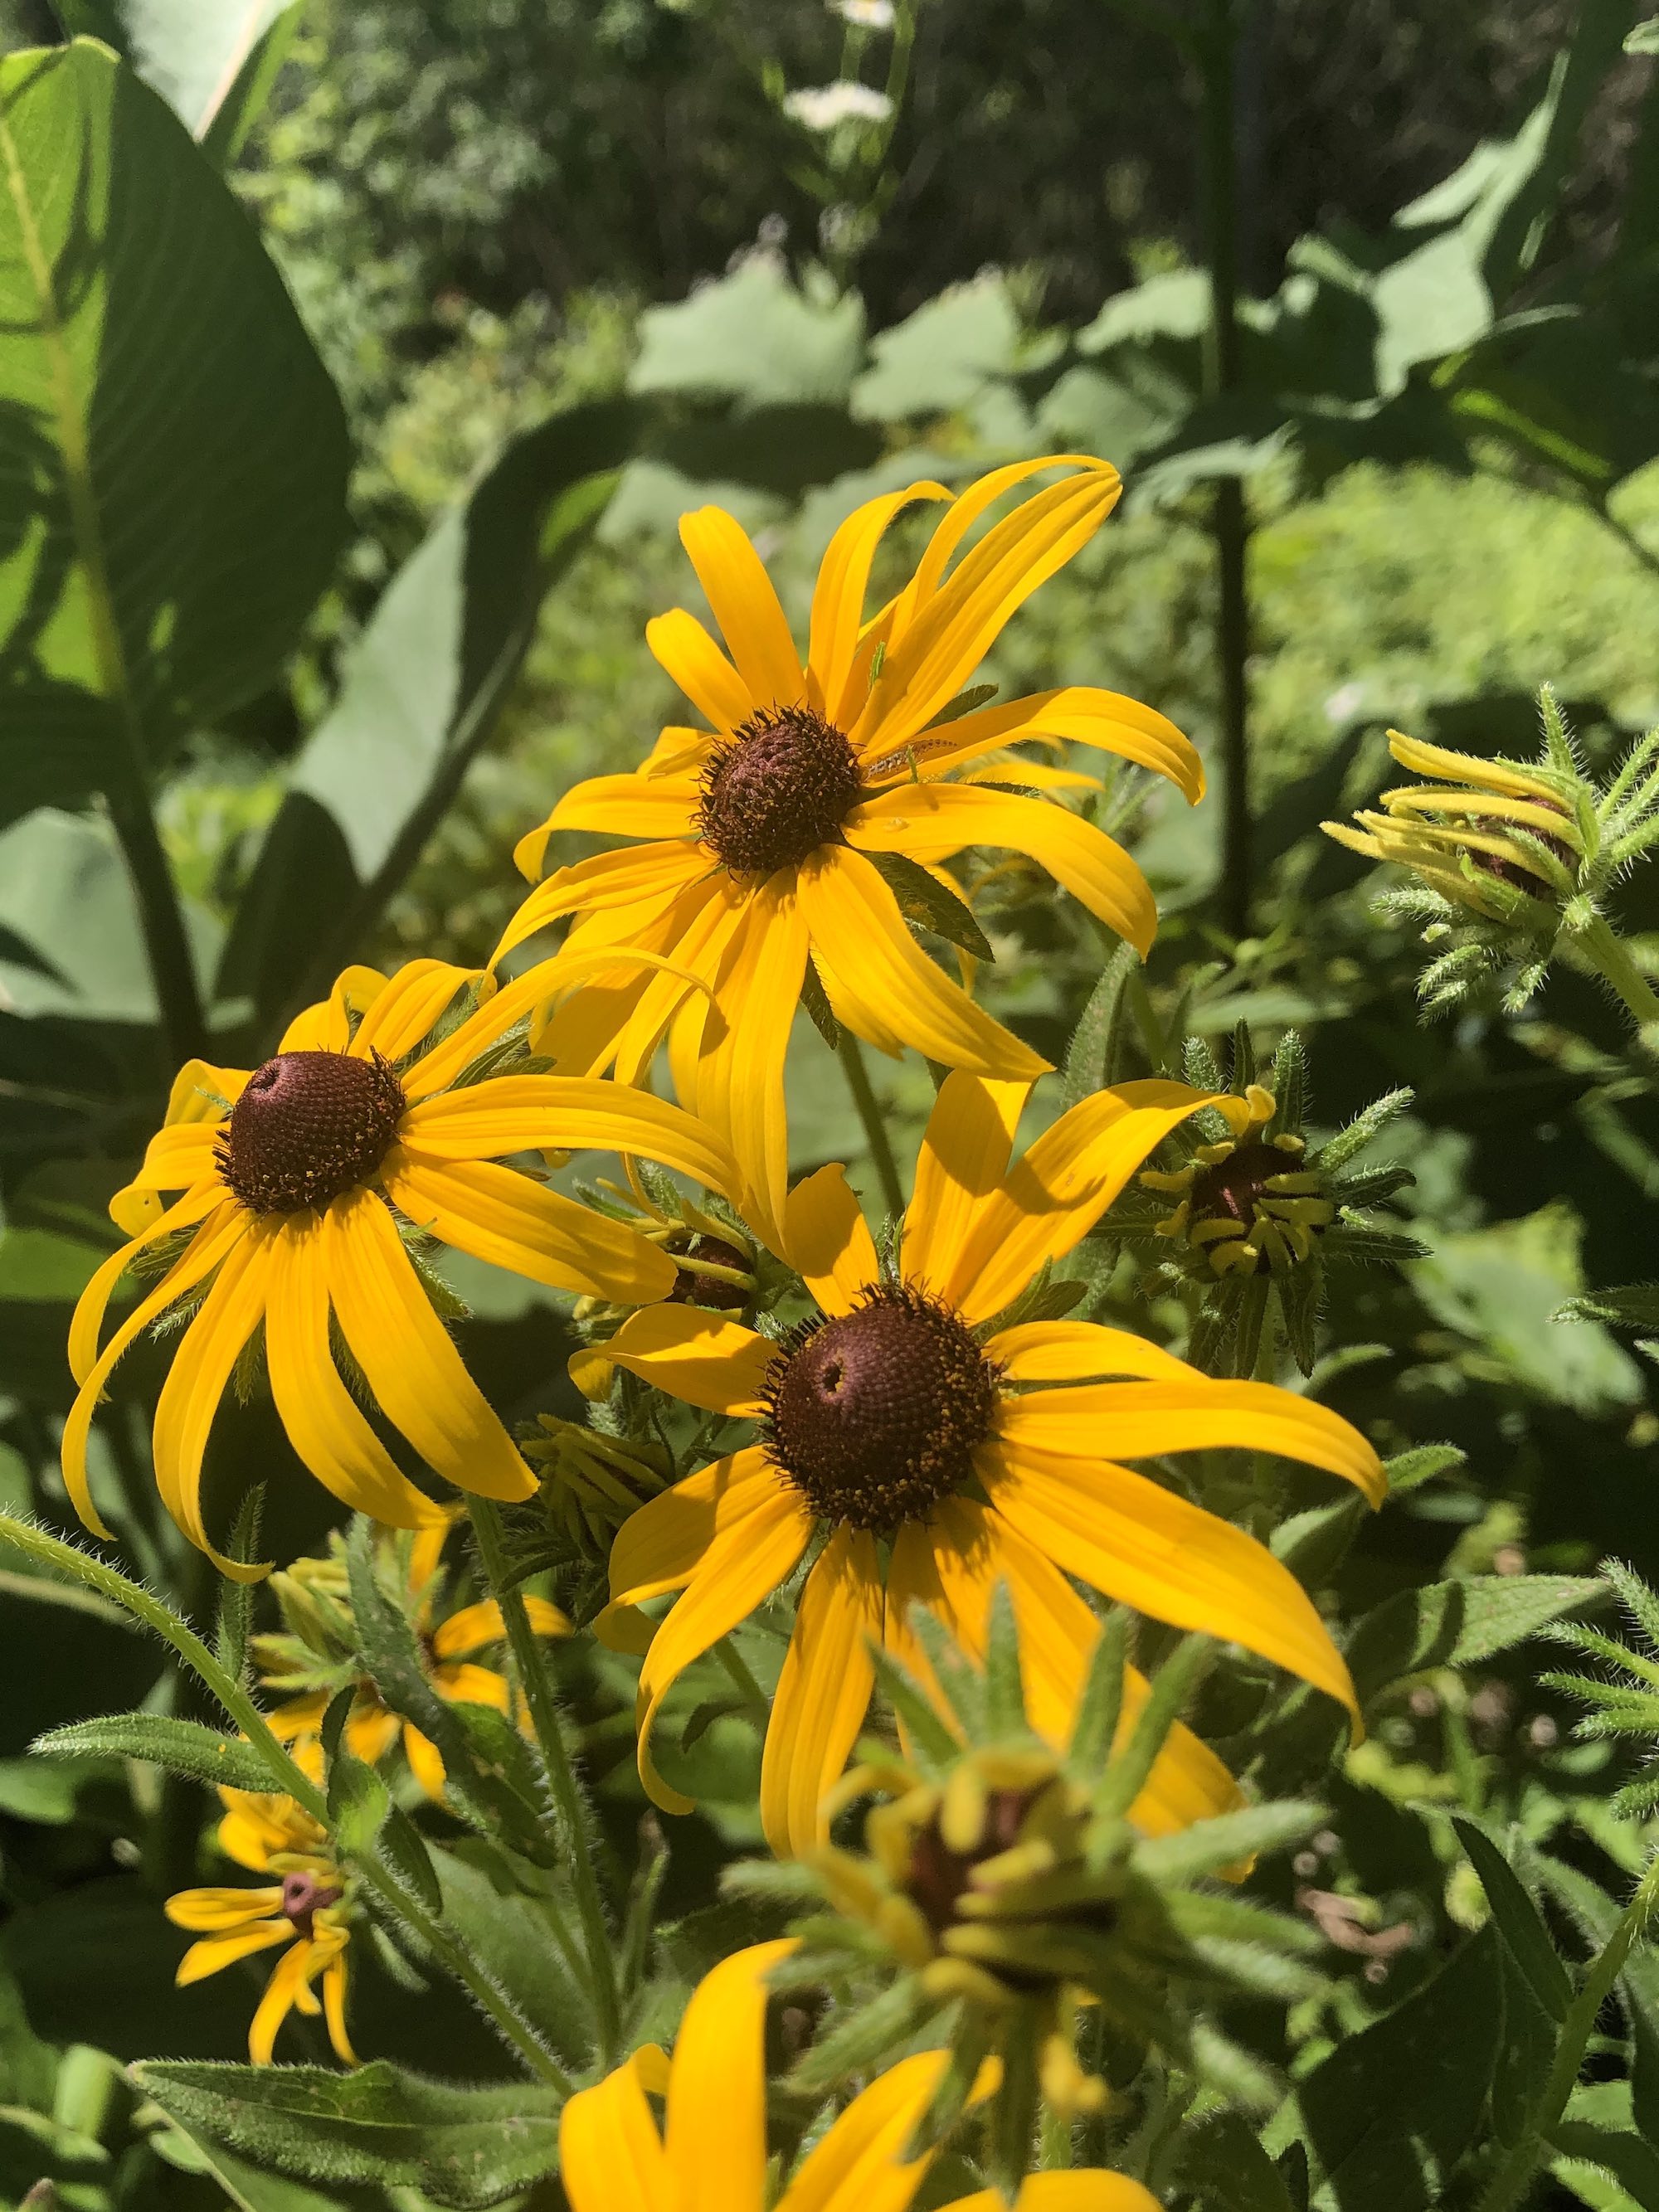 Black-eyed Susan on banks of Marion Dunn Pond in Madison, Wisconsin on June 21, 2021.